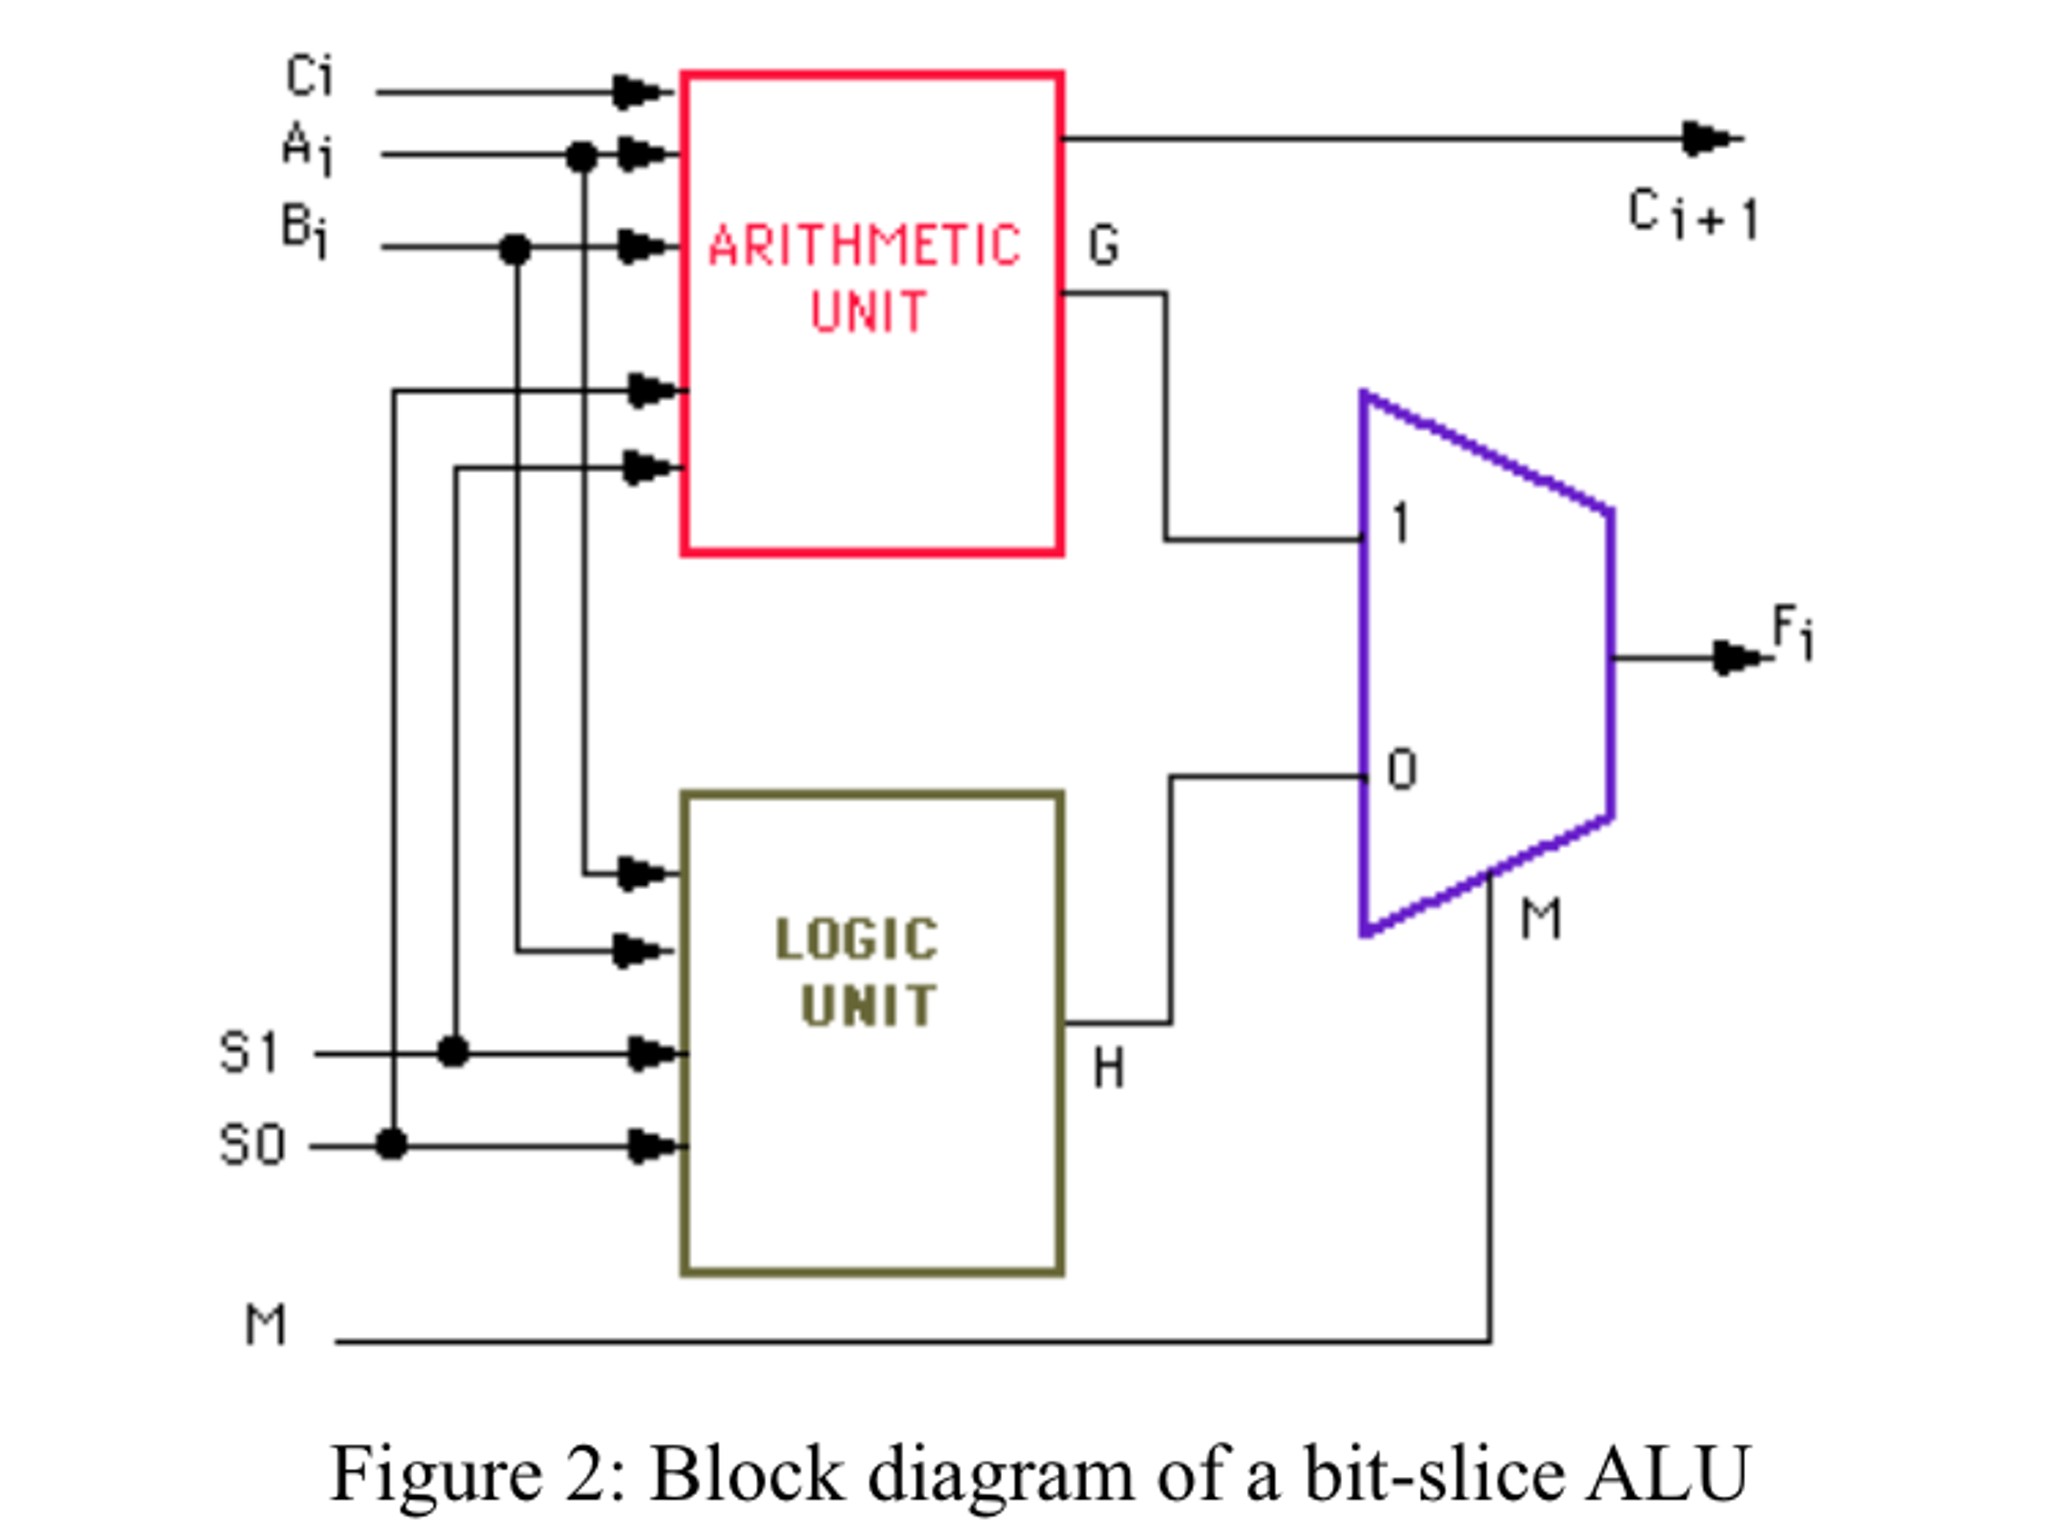 A possible block diagram of the ALU is shown in Figure 2 It consists of three modules 2 1 MUX a Logic unit and an Arithmetic unit